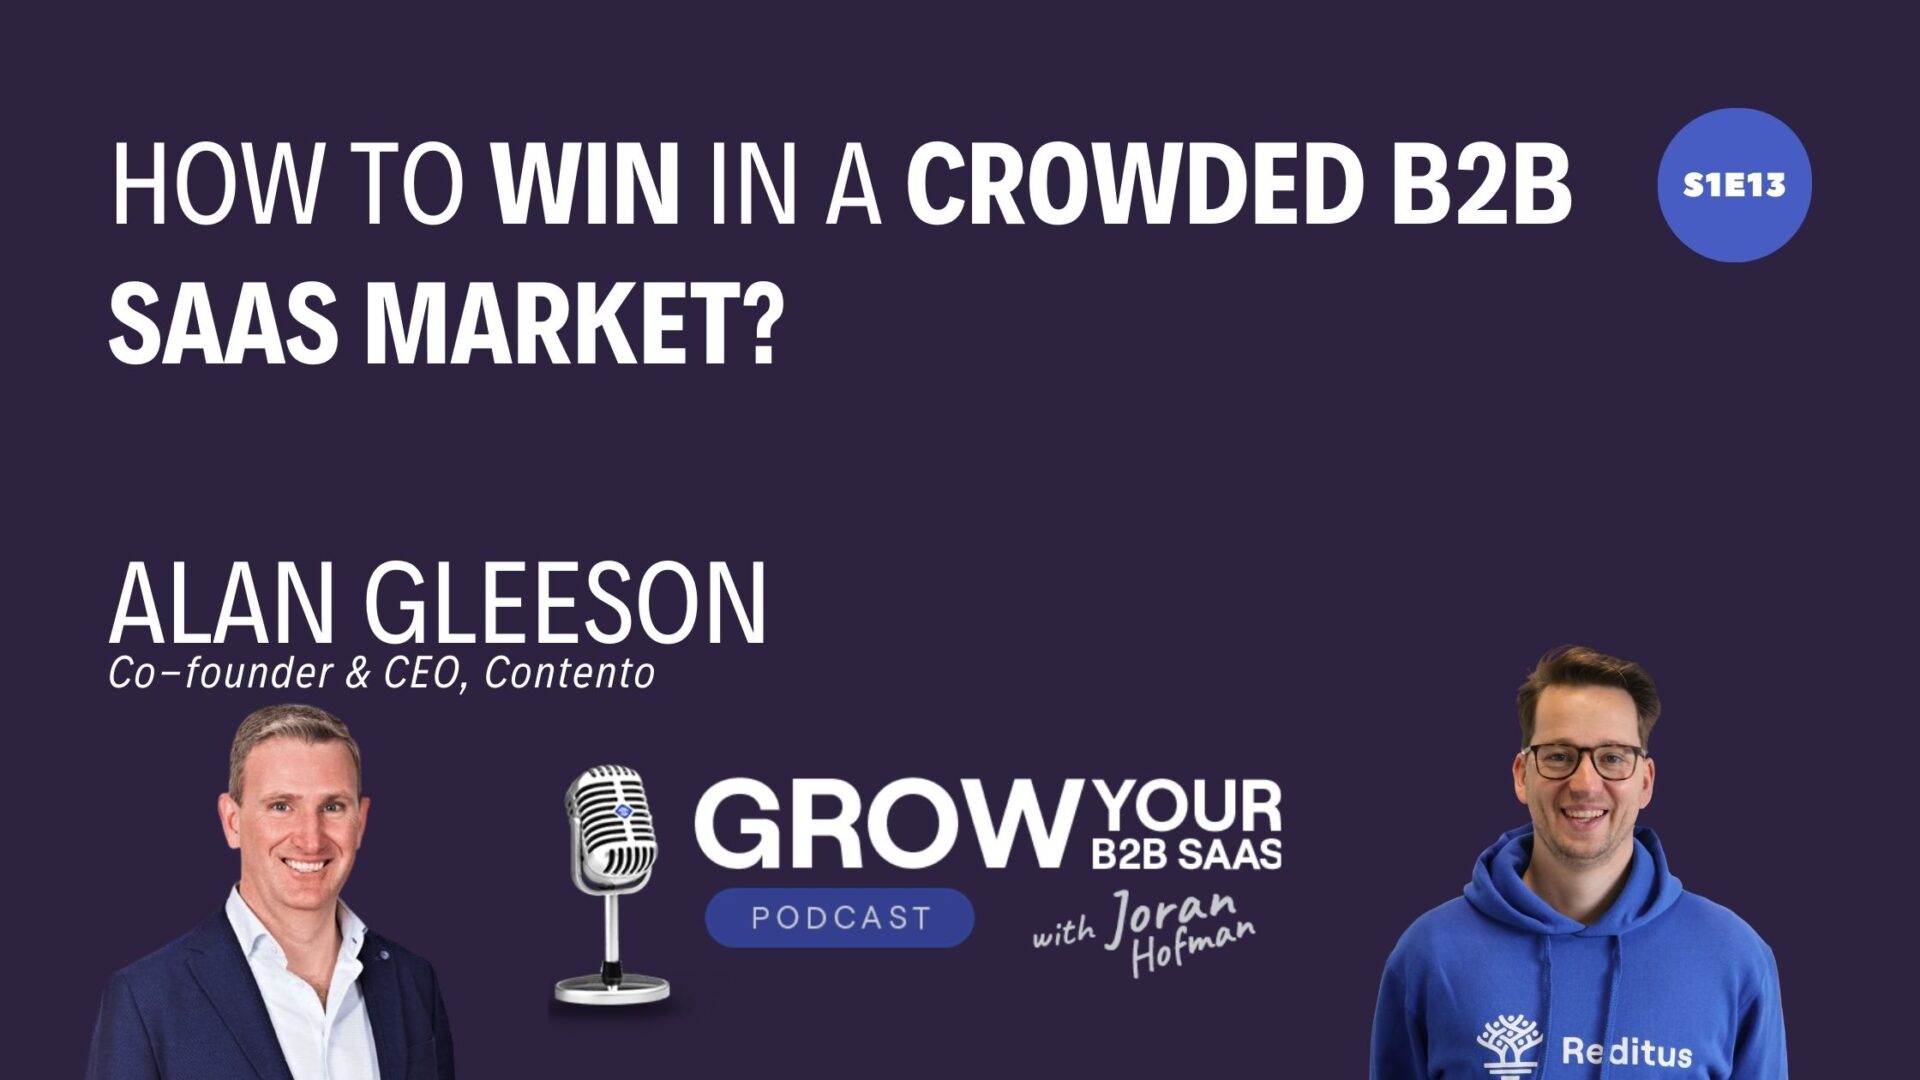 https://www.getreditus.com/podcast/s1e13-how-to-win-in-a-crowded-b2b-saas-market-with-alan-gleeson/